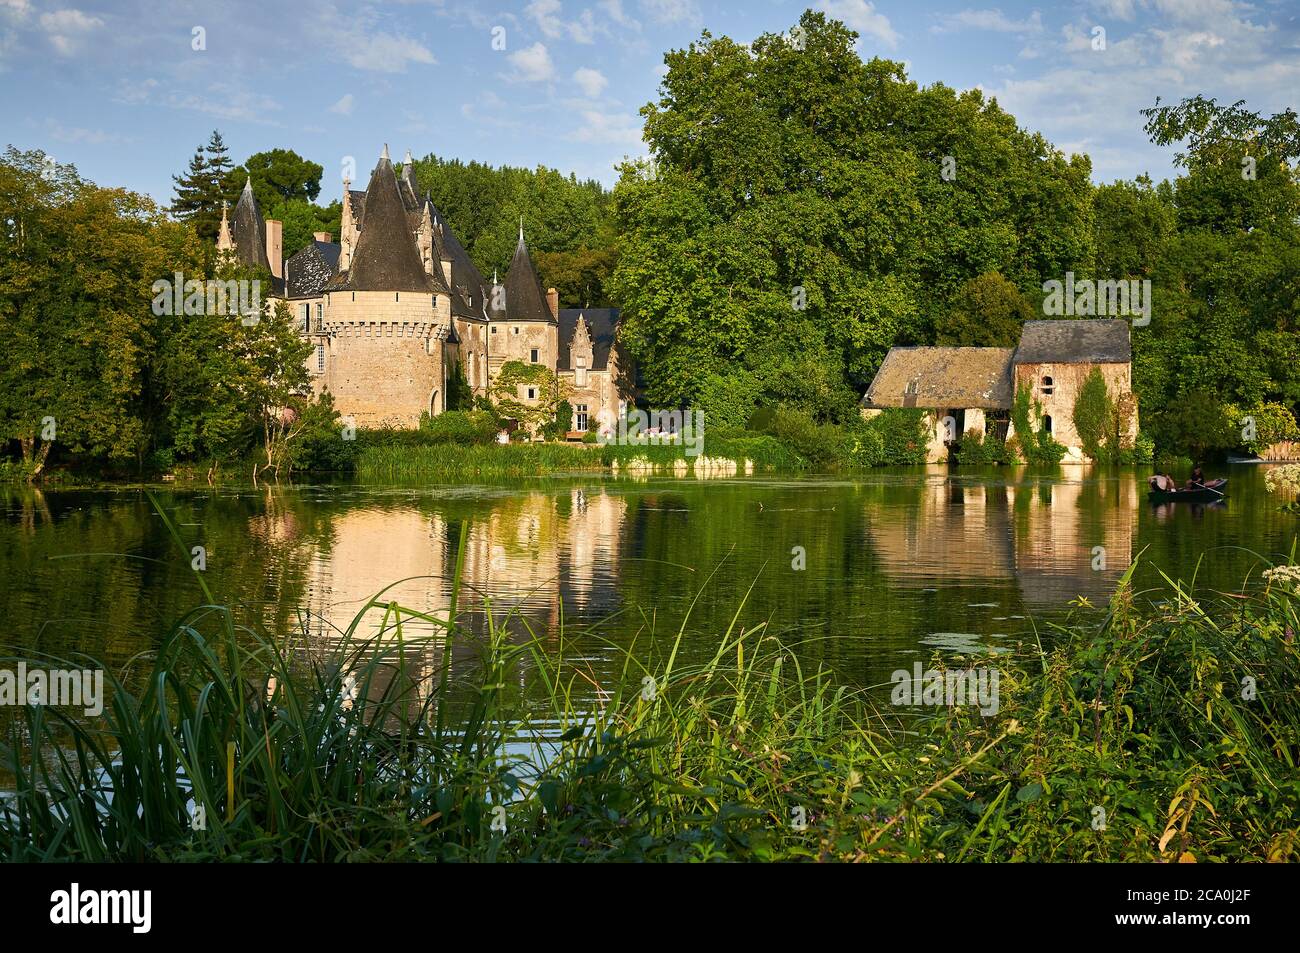 The Chateau de Bazouges and watermill on the River Loir, France Stock Photo